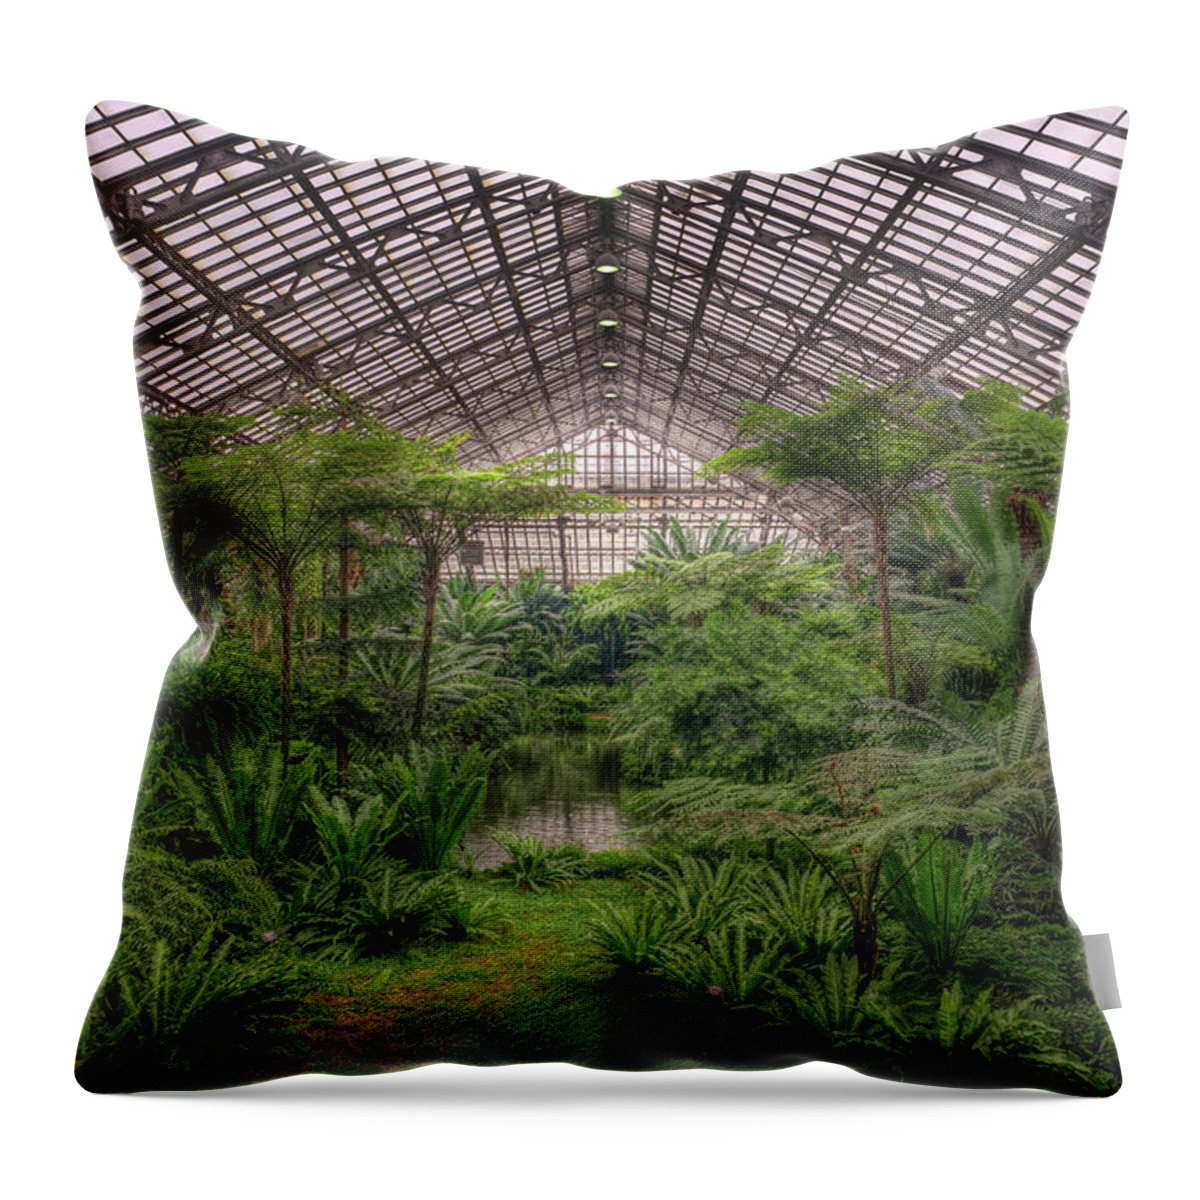 Chicago Throw Pillow featuring the photograph Garfield Park Conservatory Main Pond by Steve Gadomski